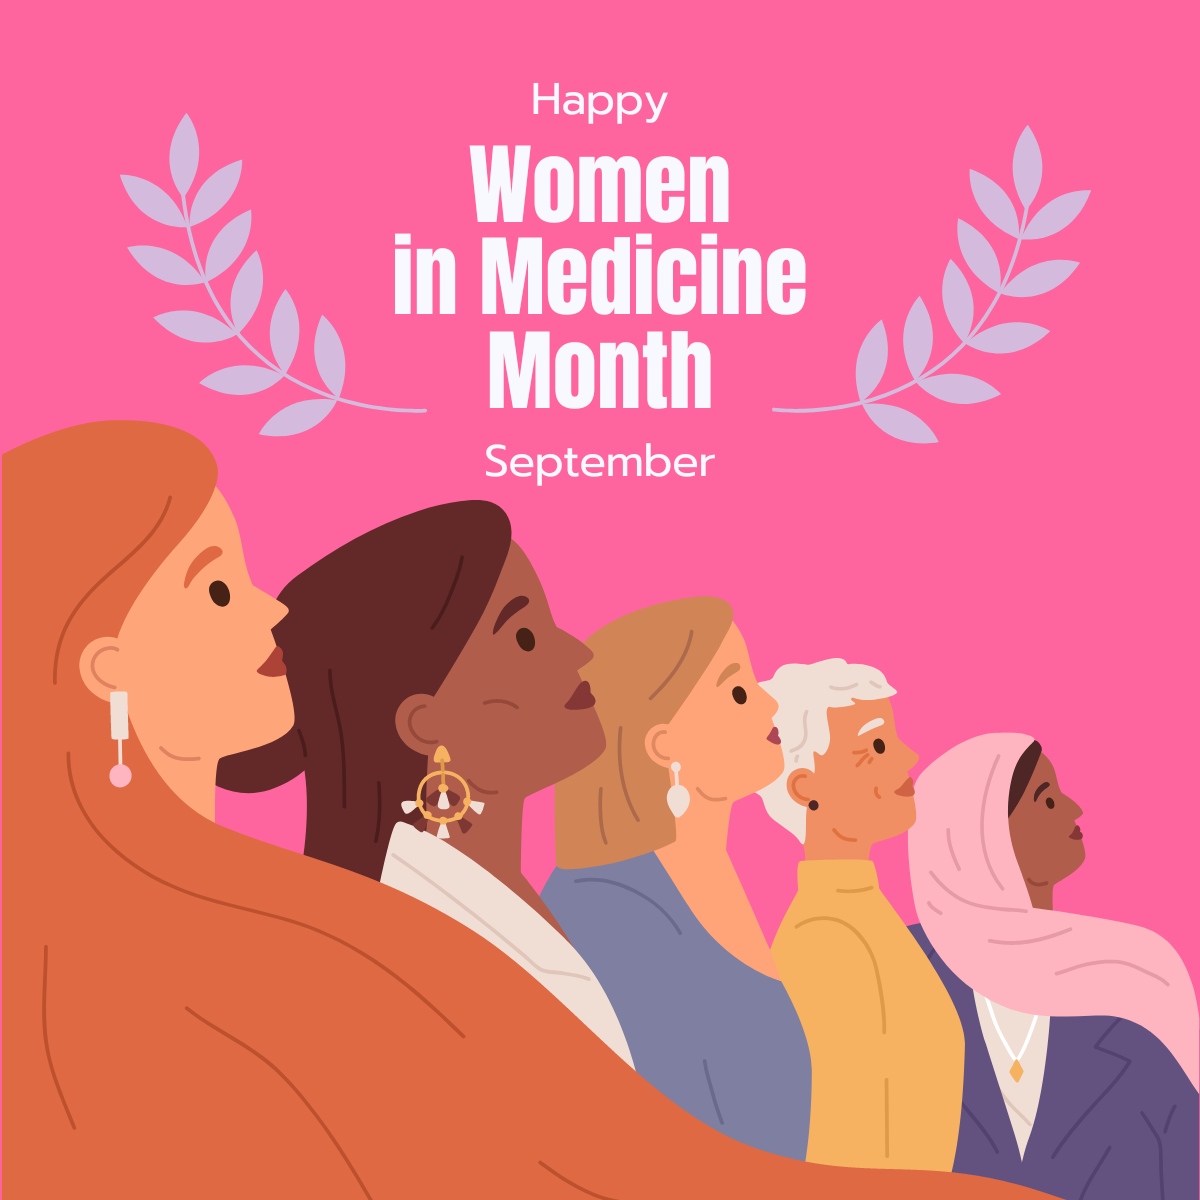 September is Women in Medicine (WIM) Month, and we’re celebrating the achievements of all female doctors and their advocacy for their patients’ health!

#WIMMonth #WomenInMedicine #FemalesInMedicine #ElizabethBlackwell